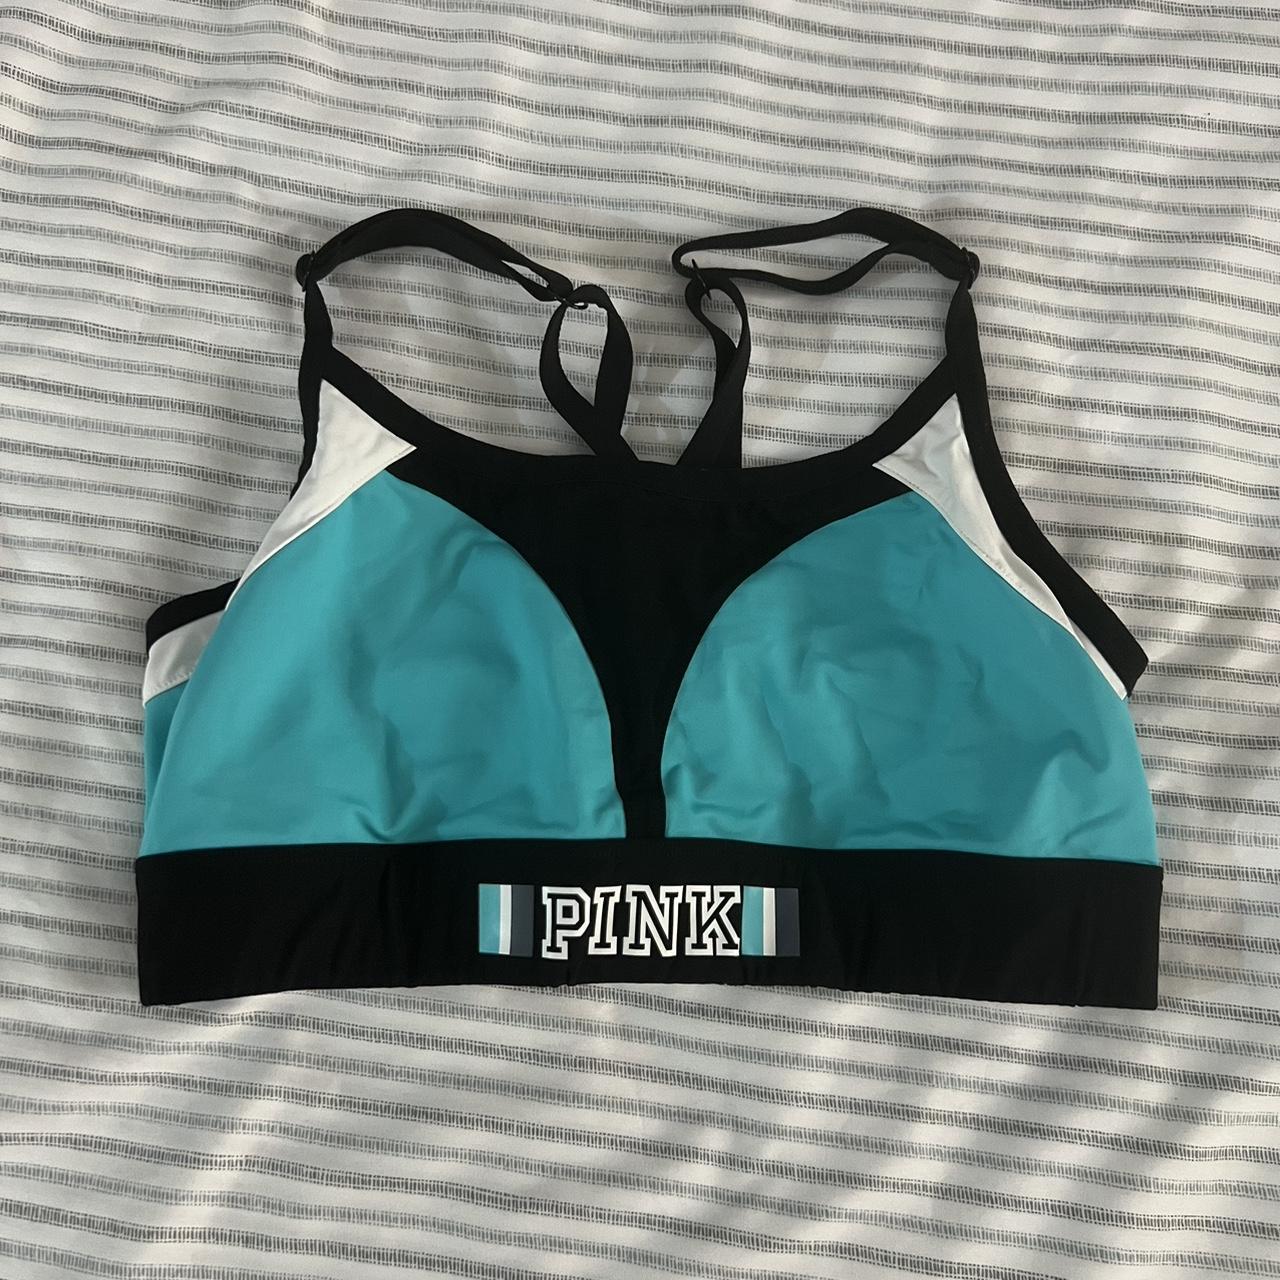 Turquoise and Black Sports Bra !! please message - Depop